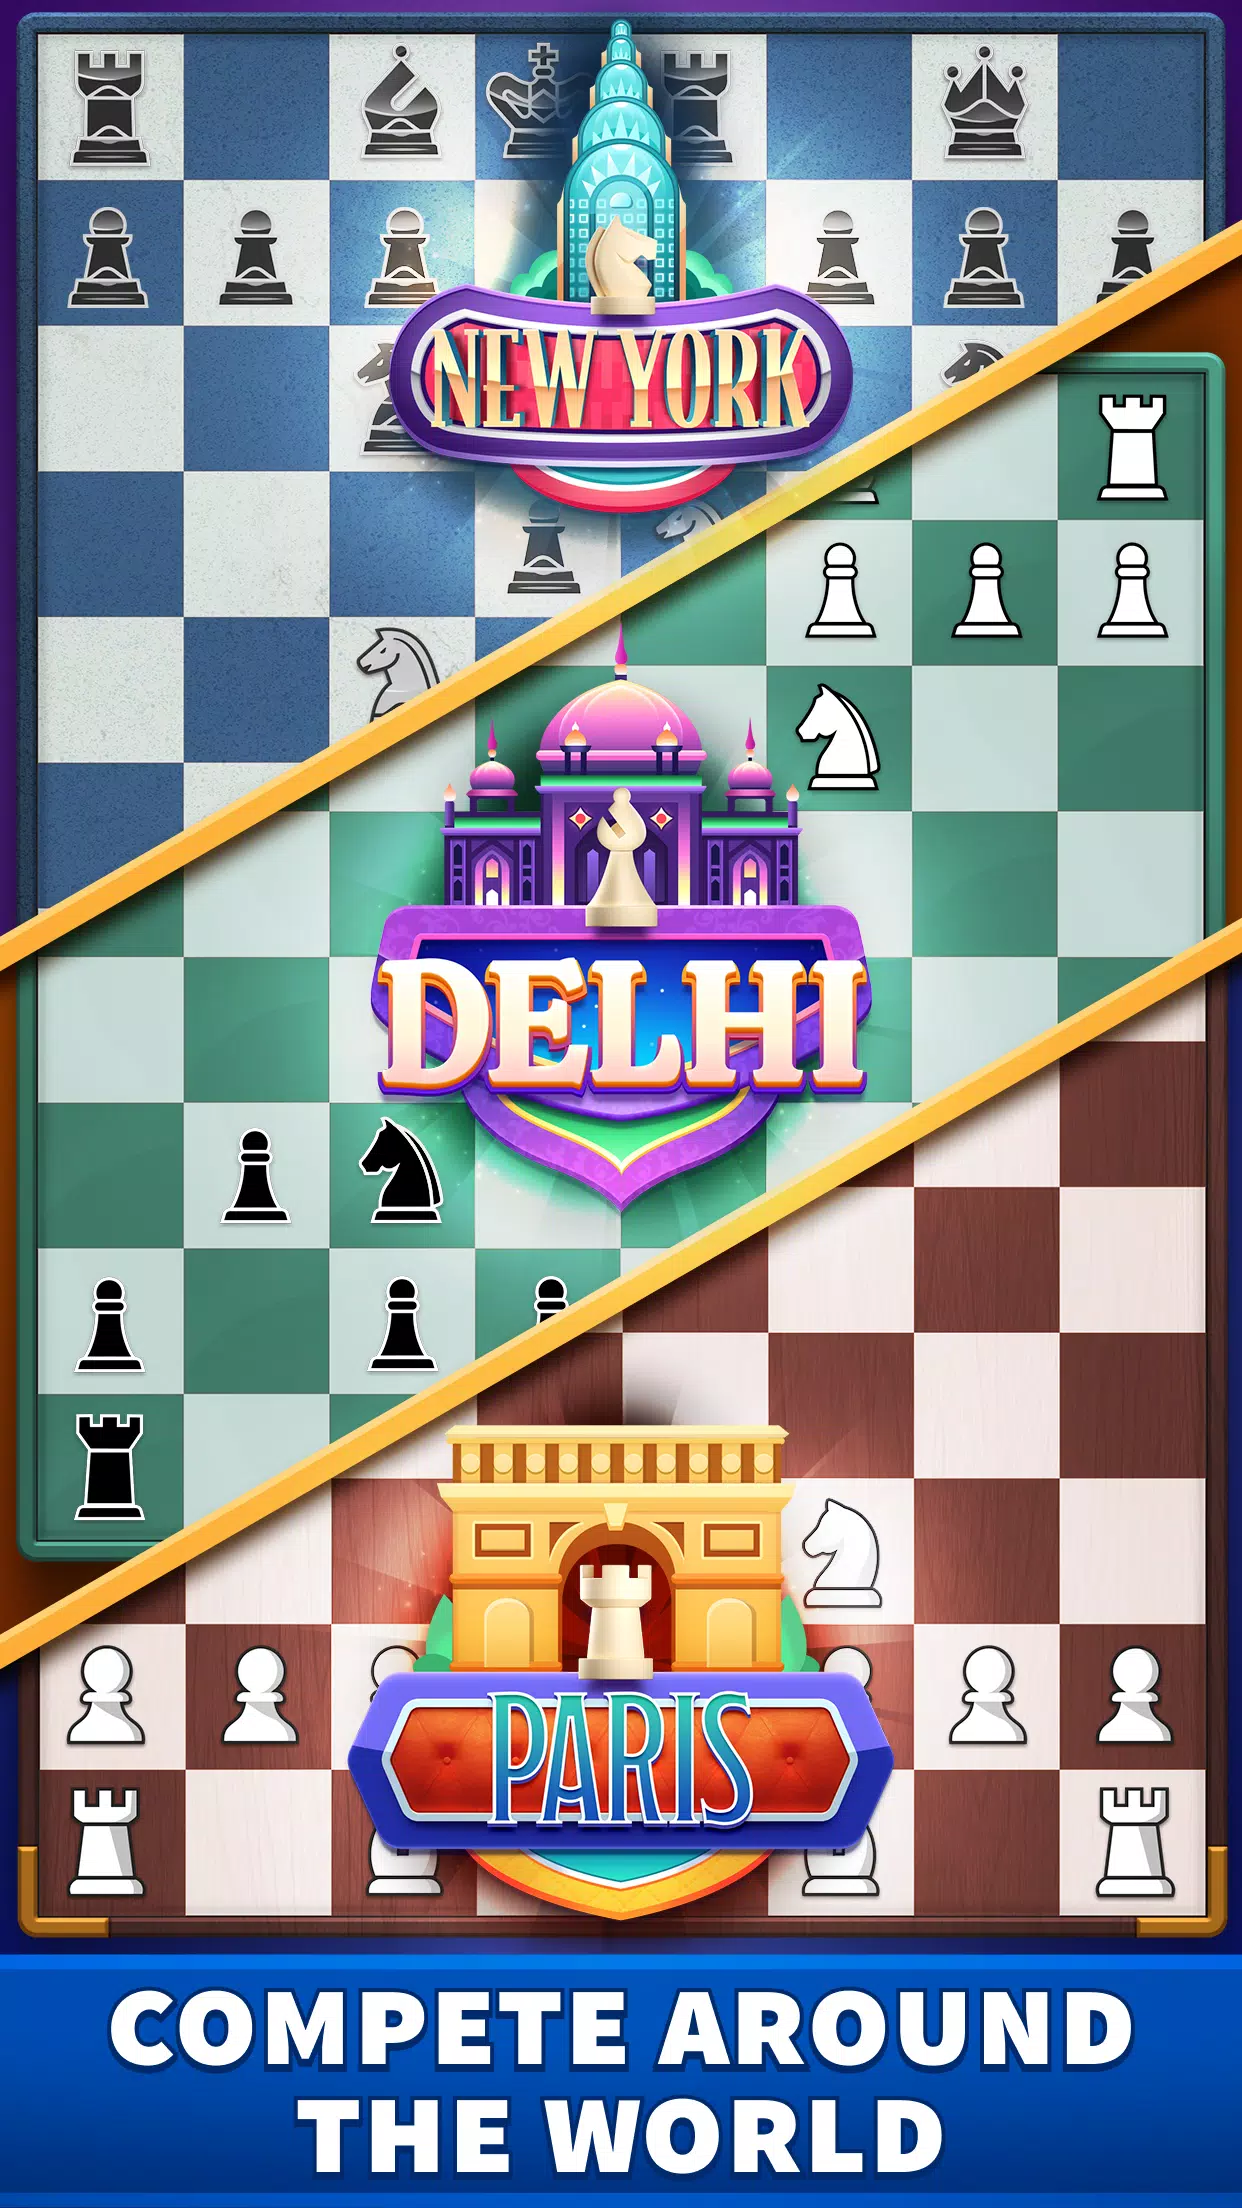 Classic Chess v1.06 APK Download